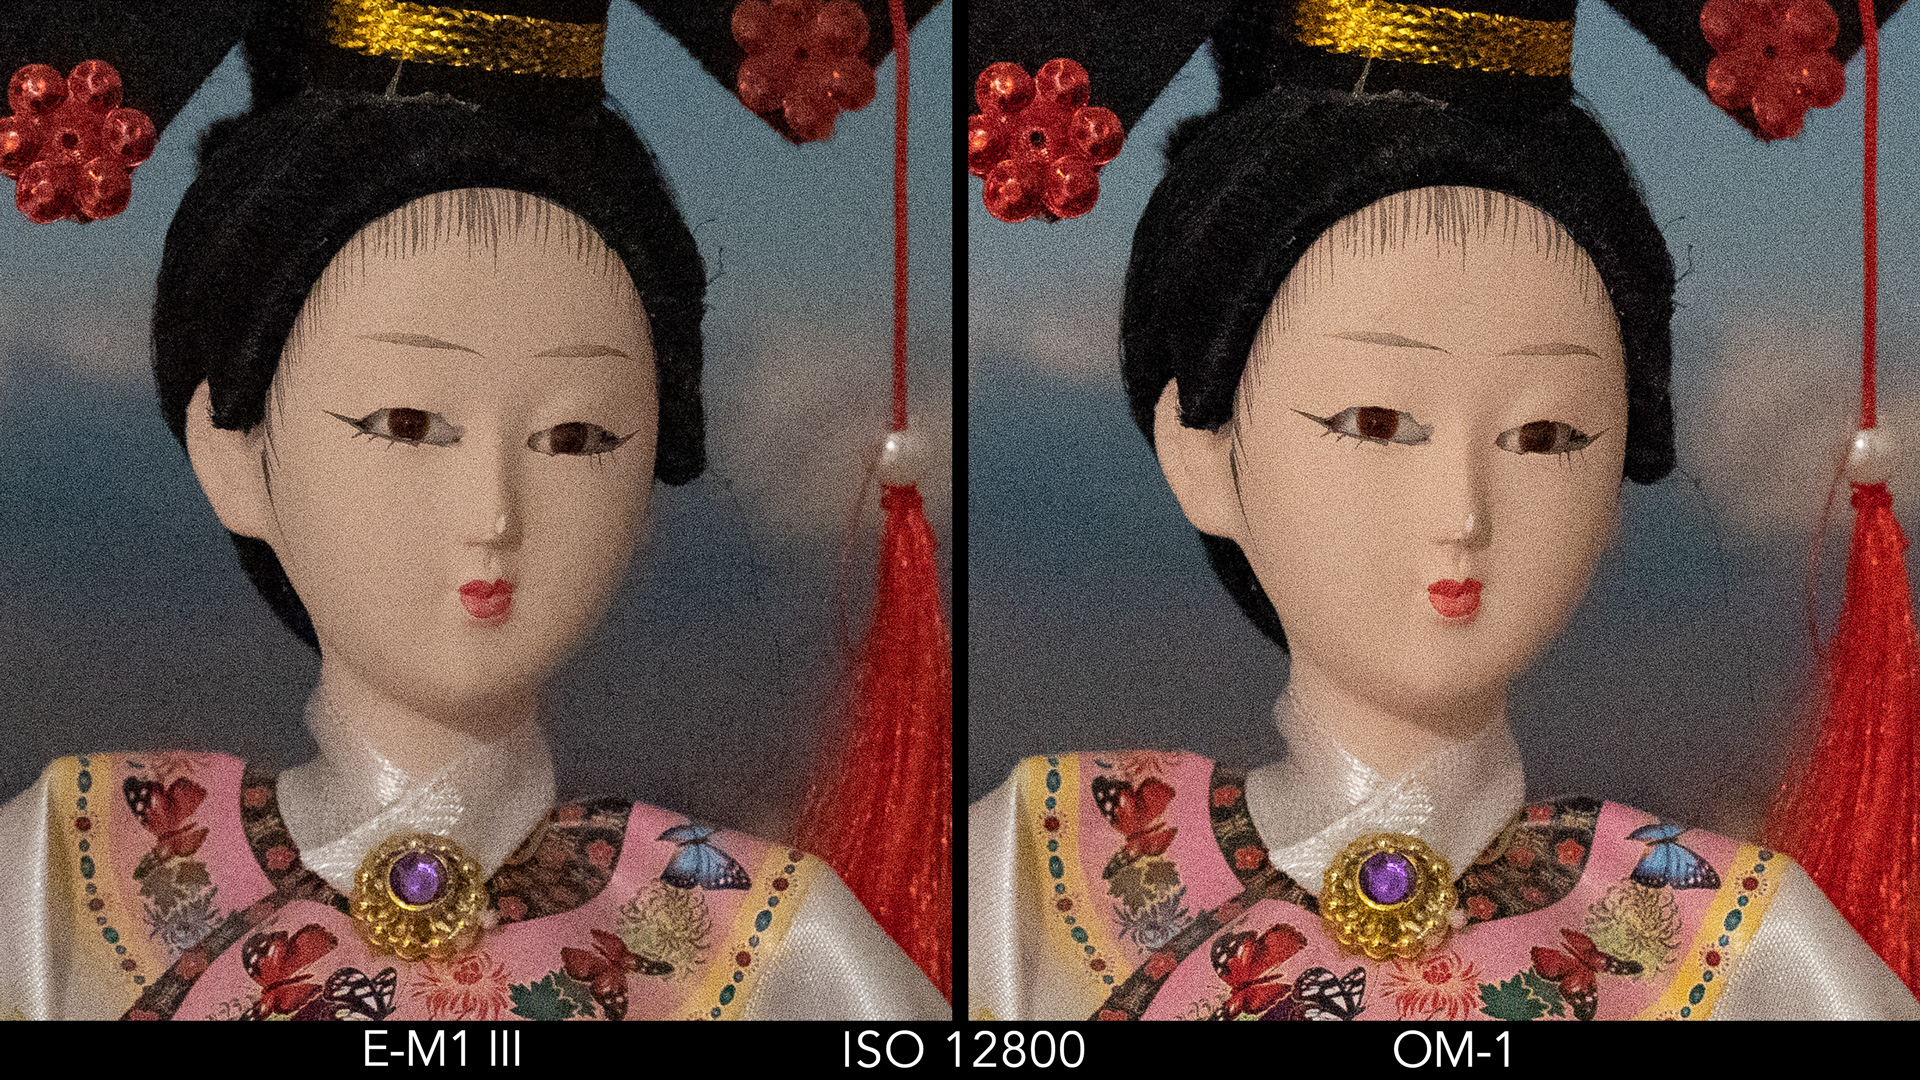 side by side image of a Japanese doll comparing ISO 12800 for the E-M1 III and OM-1